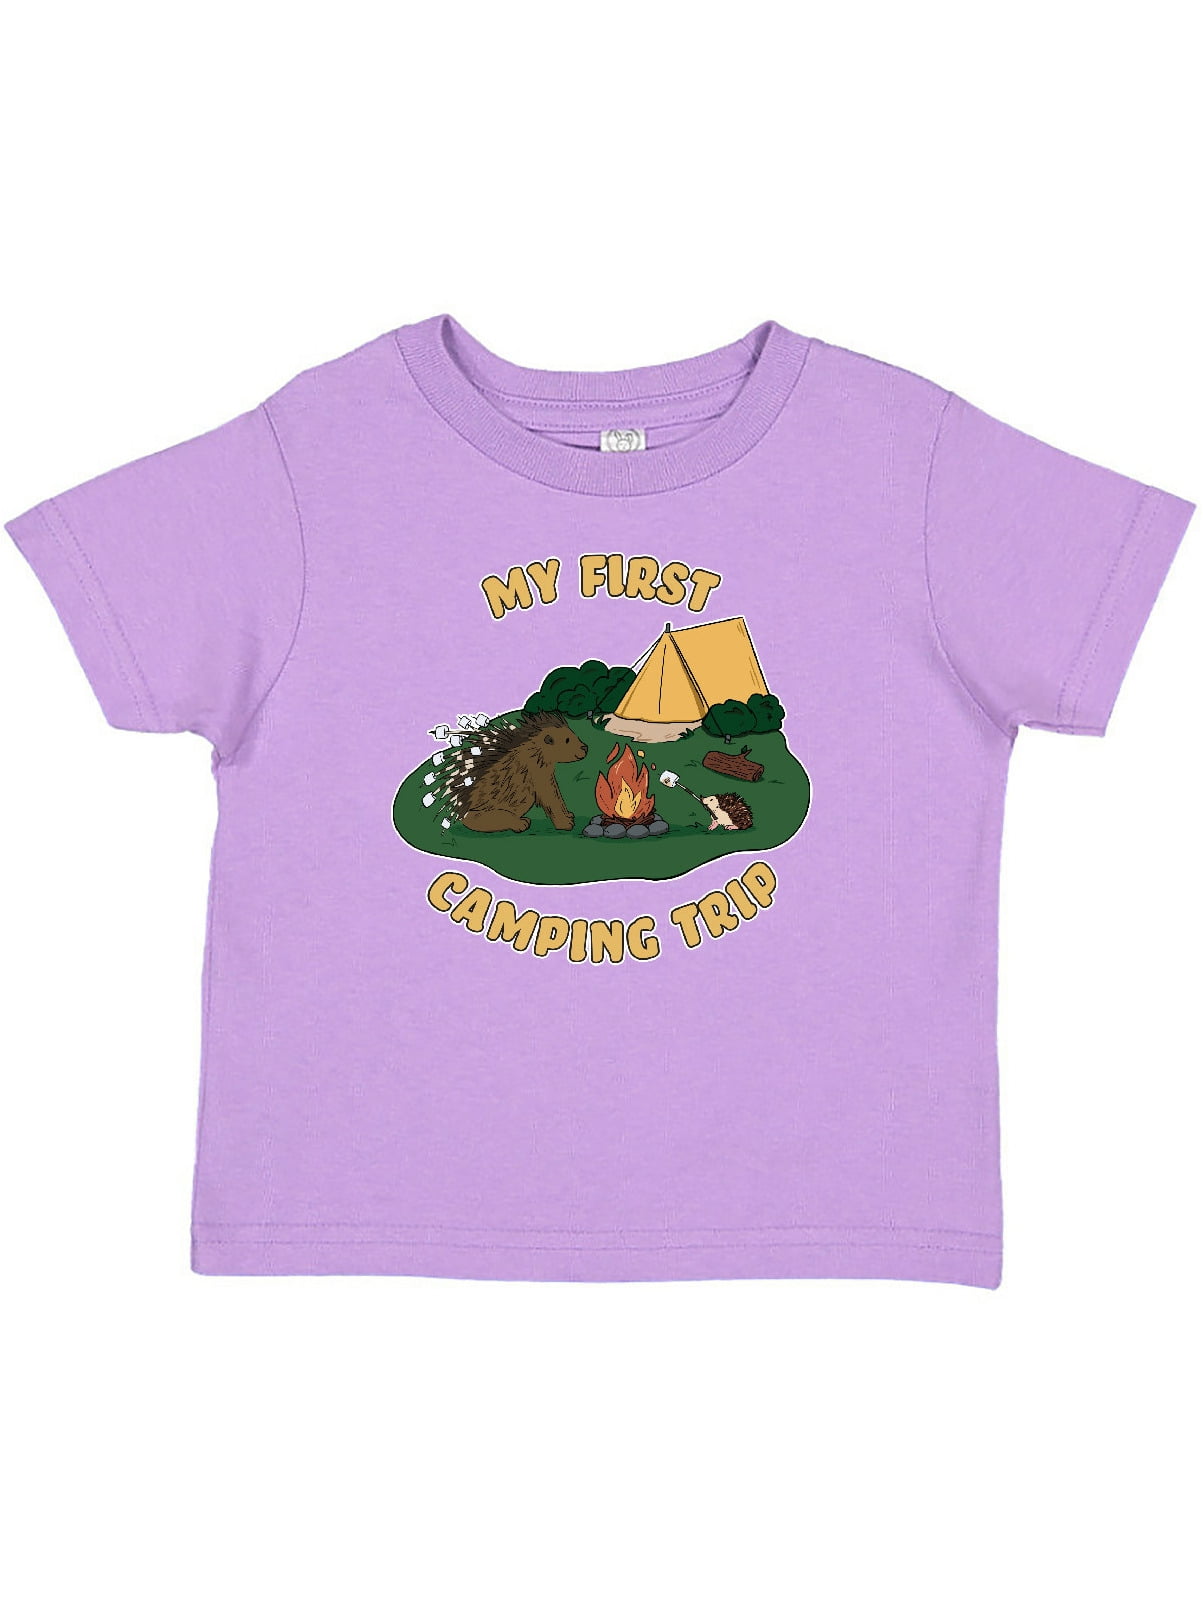 inktastic My 1st Camping Trip Baby T-Shirt